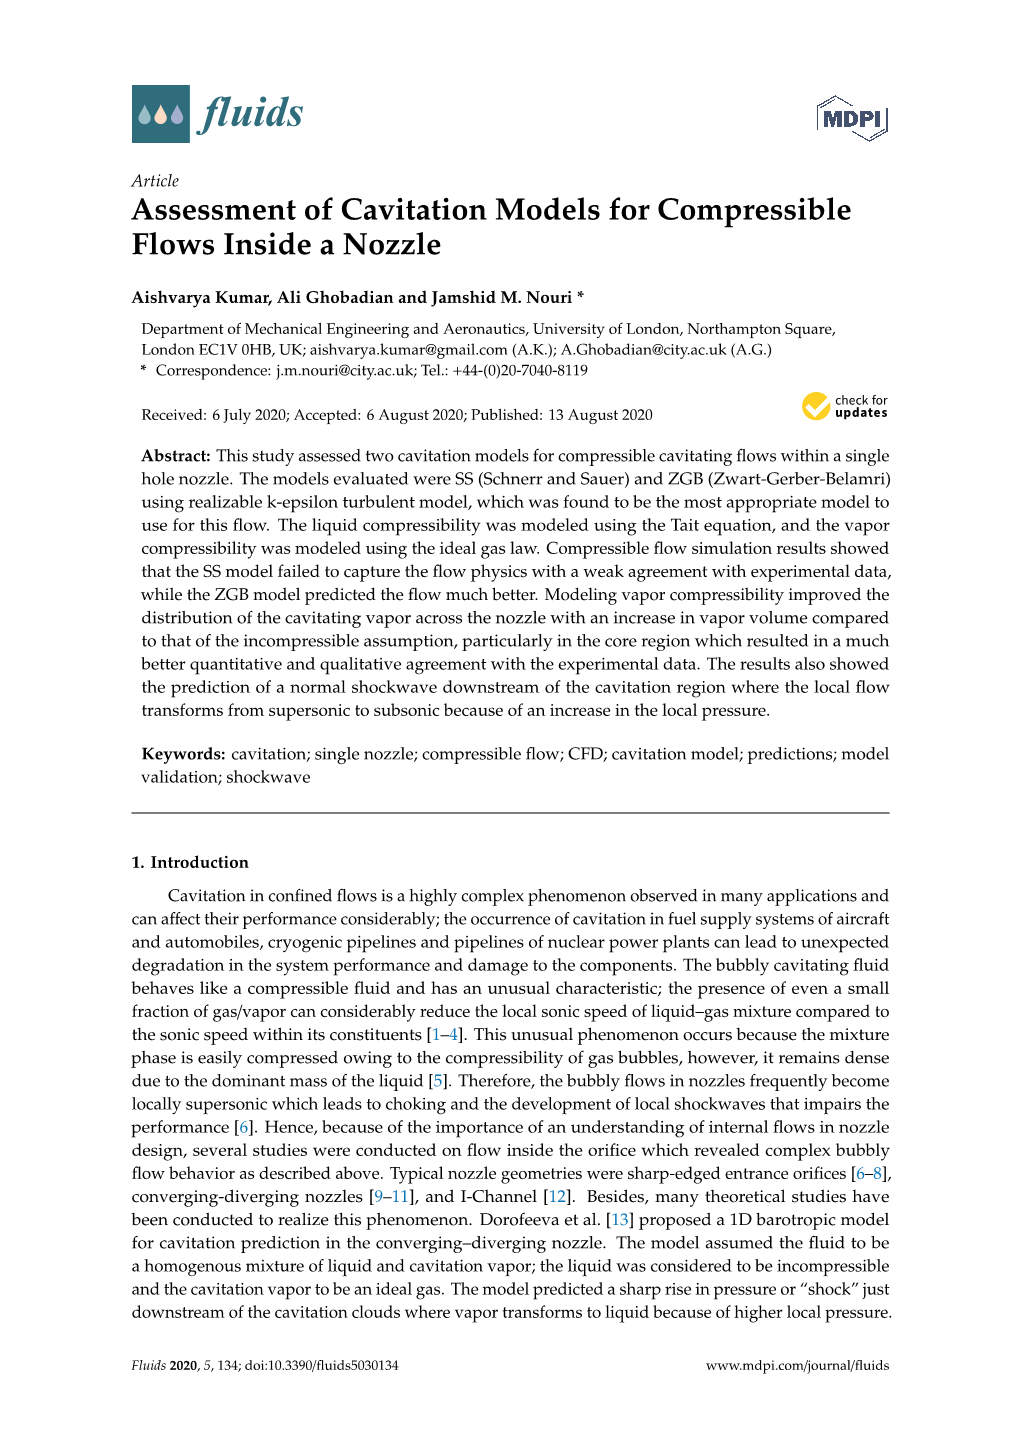 Assessment of Cavitation Models for Compressible Flows Inside a Nozzle